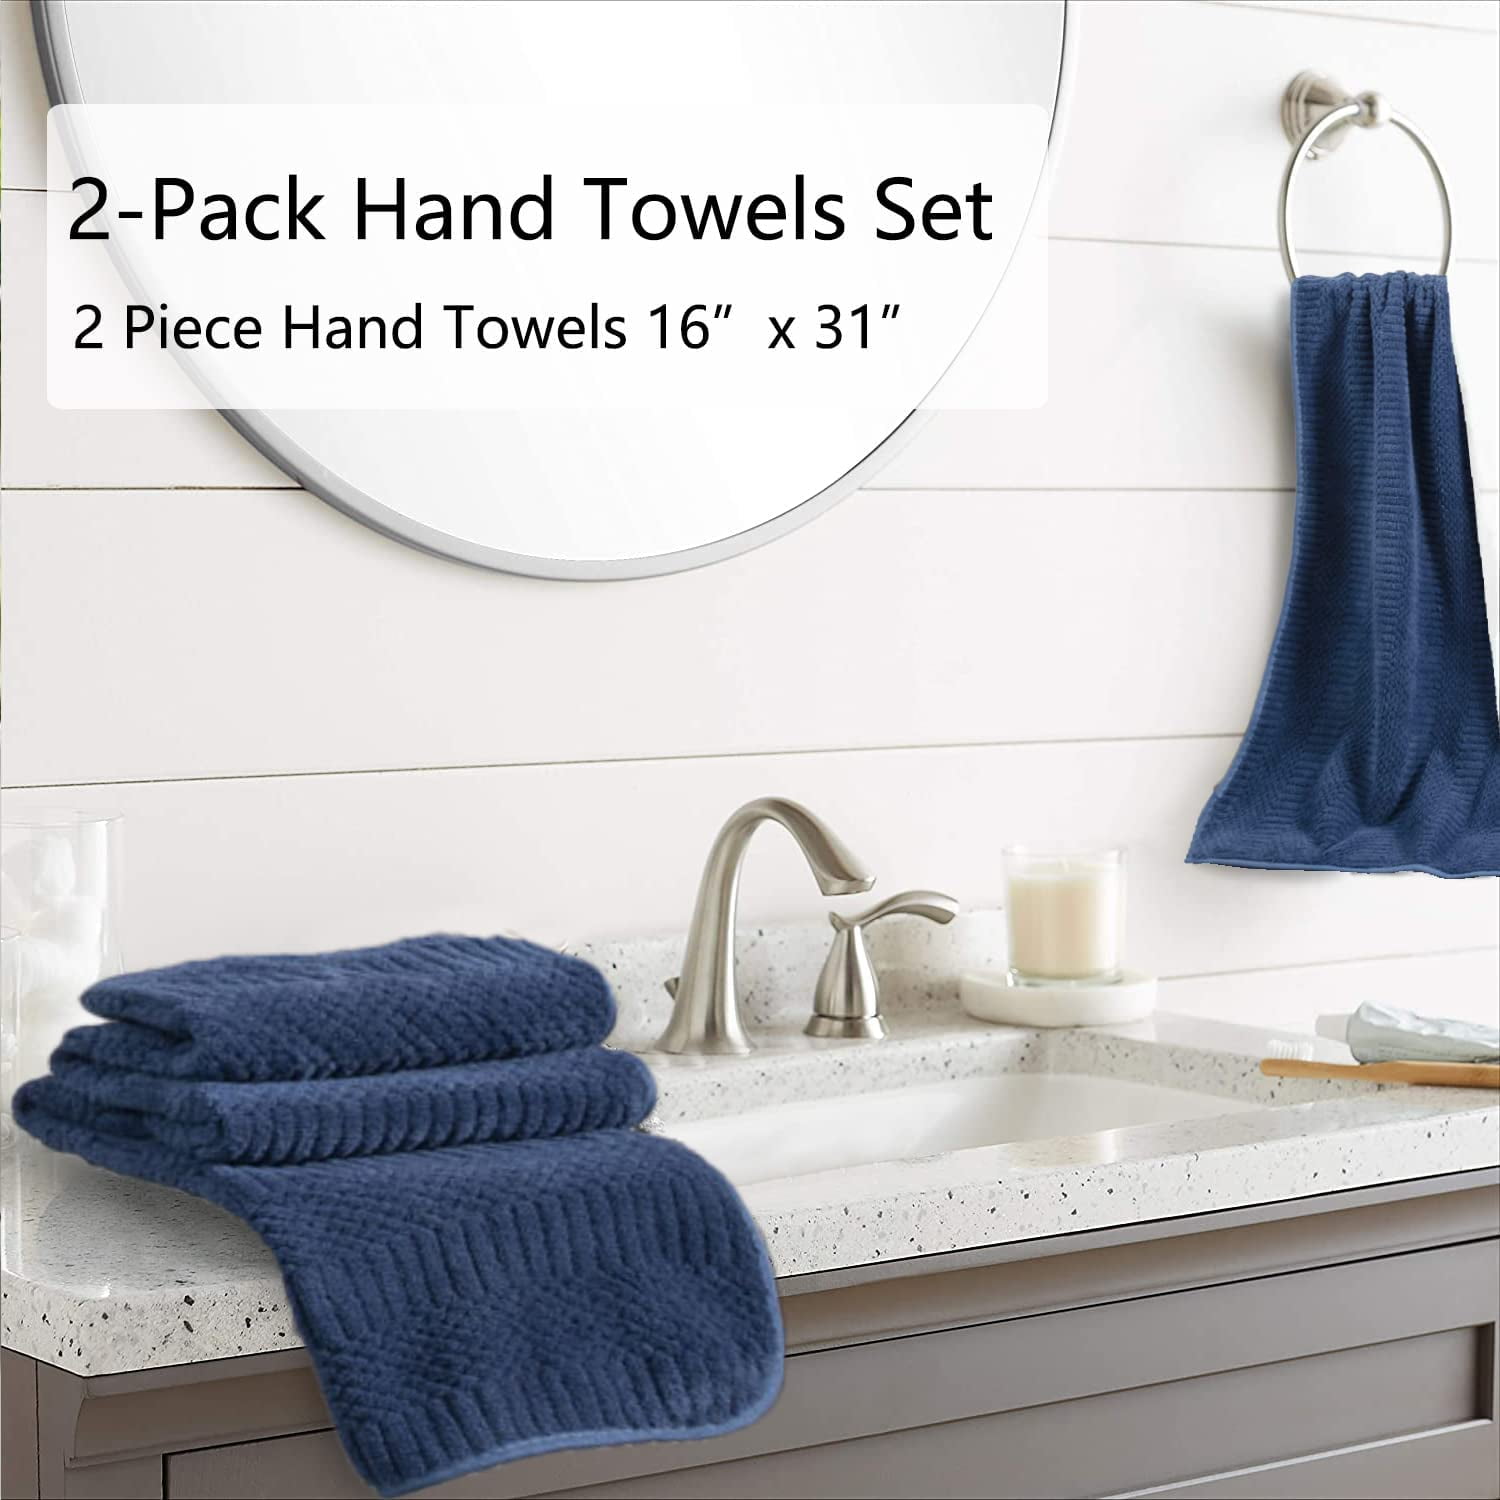 HVMS Extra Large Bath Towels Set for Bathroom 30x60 Inches Super Soft Light  Weight Quick Dry Microfiber Shower Towels (Blue,6 Piece)